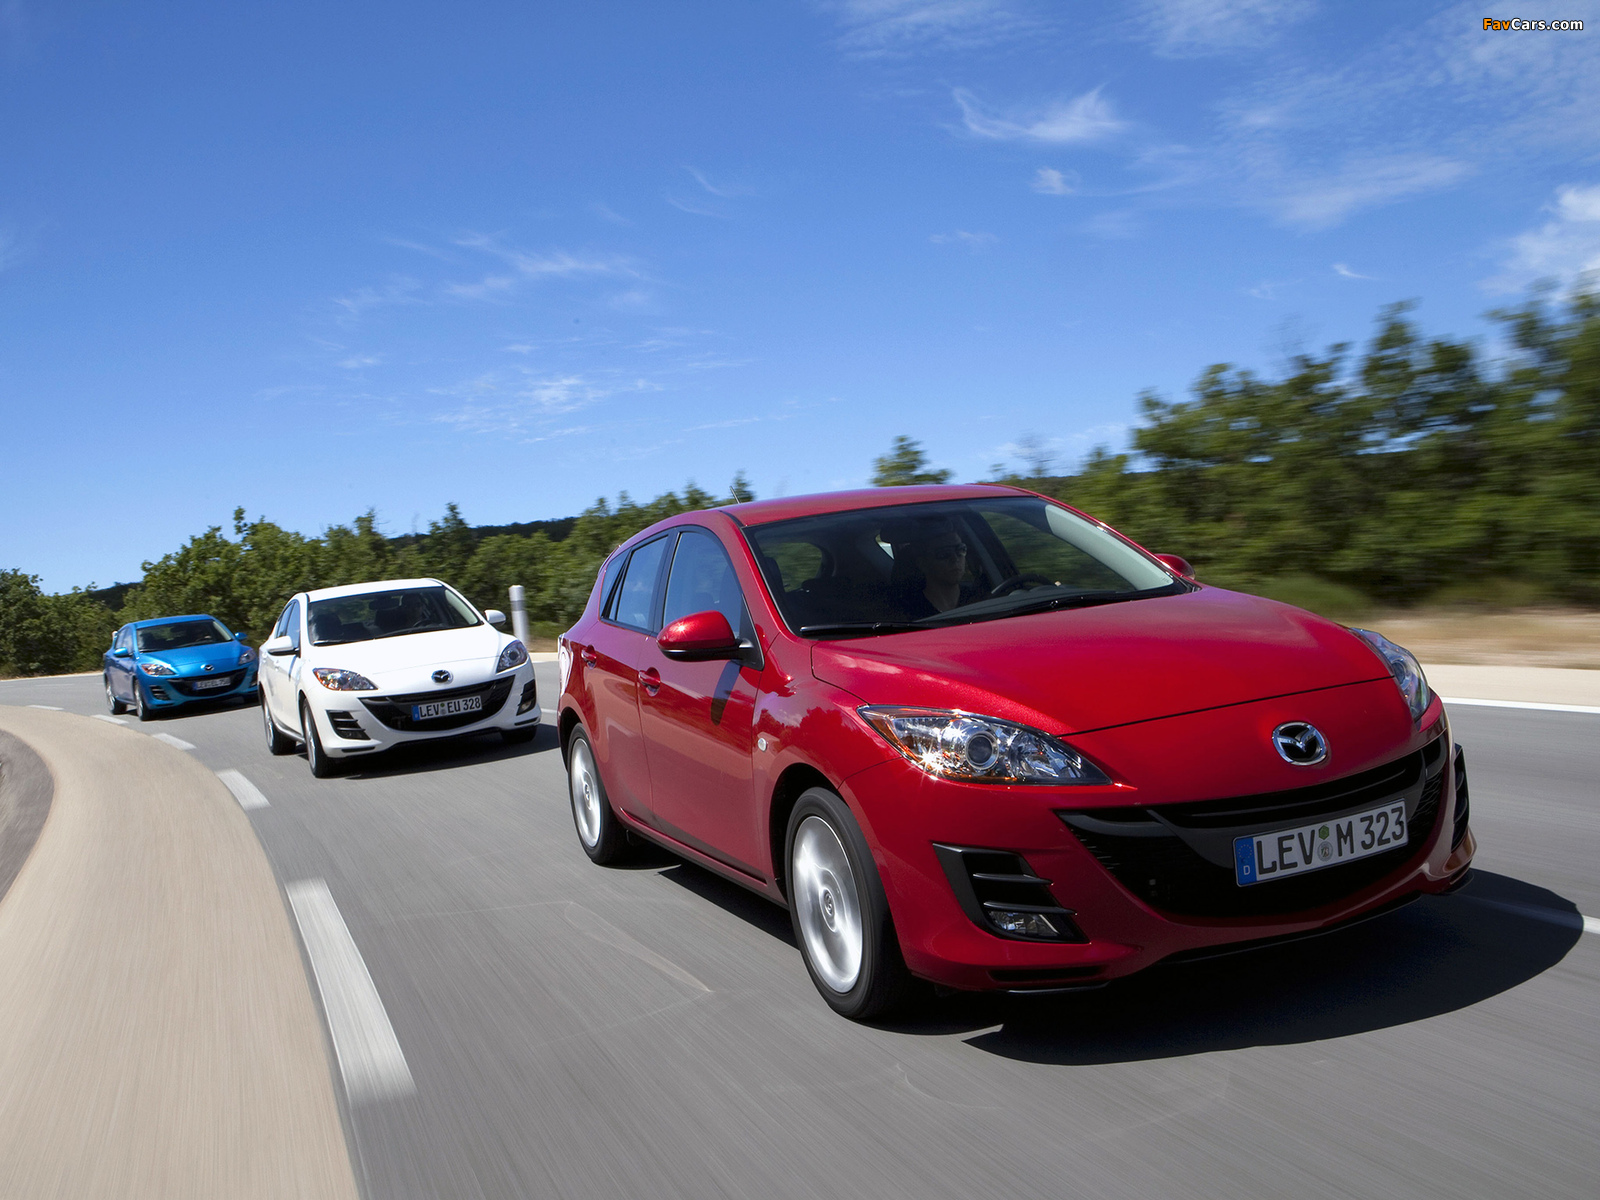 Images of Mazda 3 (1600 x 1200)